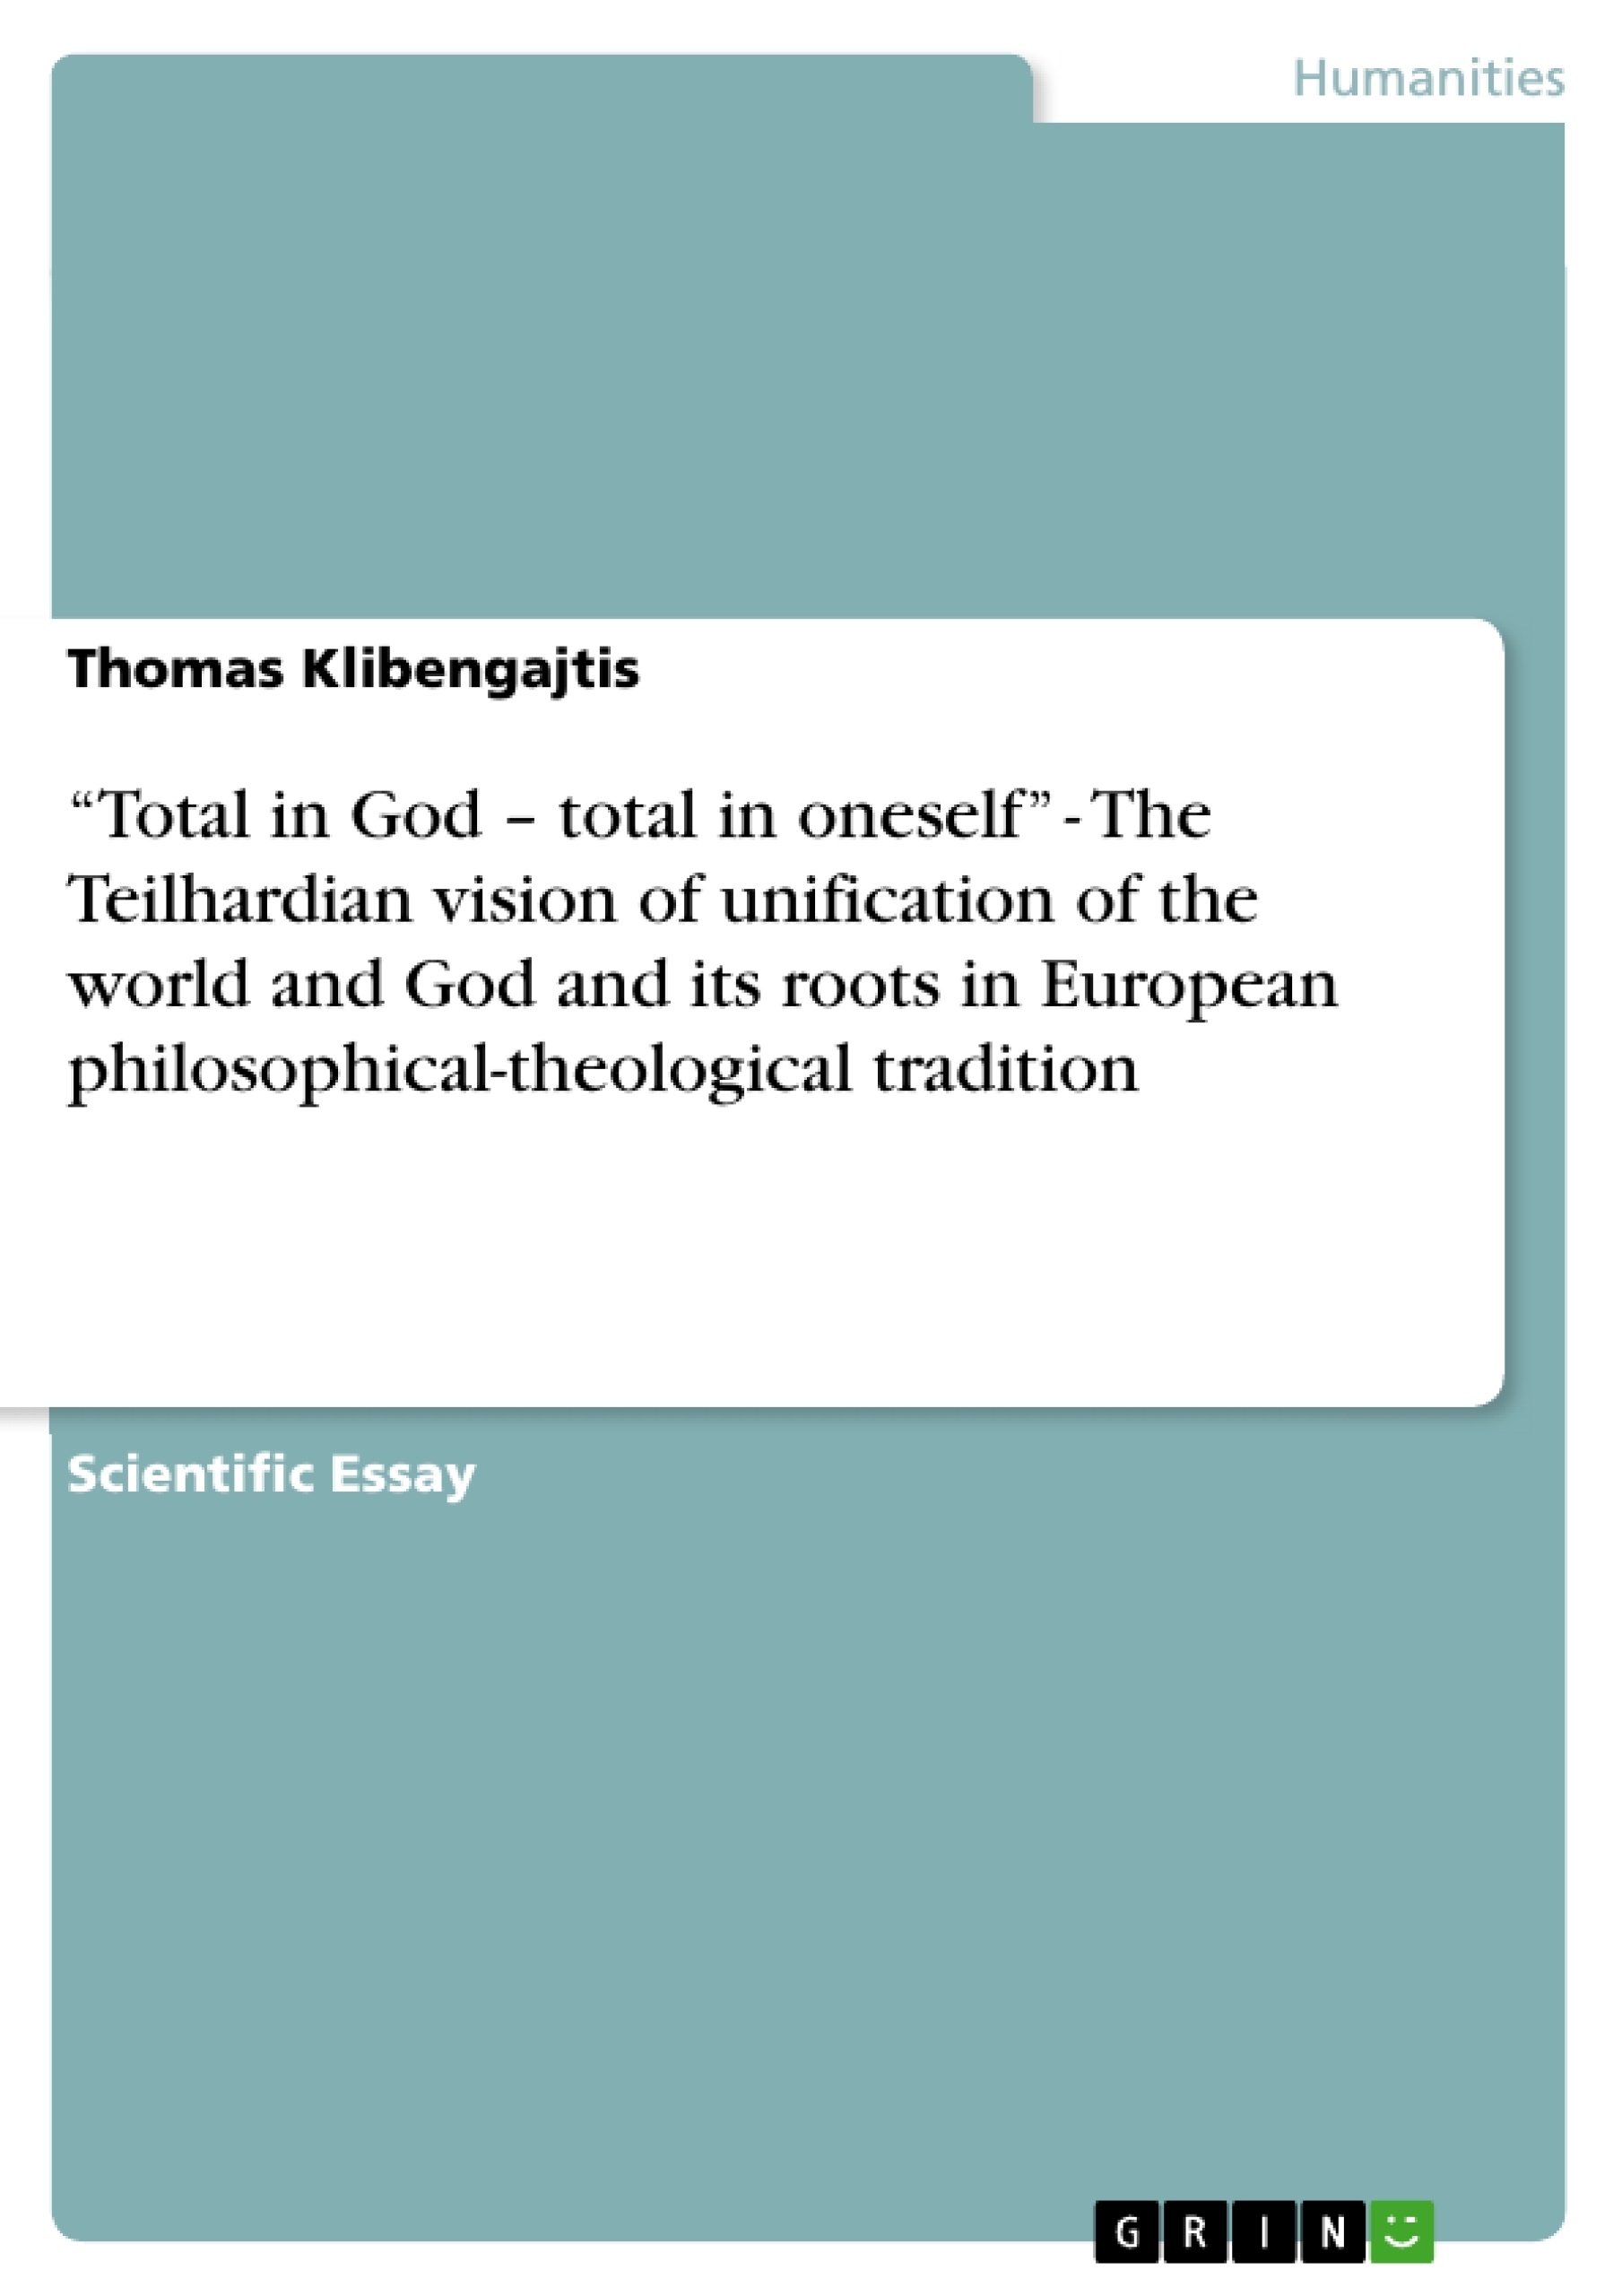 Titel: “Total in God – total in oneself” - The Teilhardian vision of unification of the world and God and its roots in European philosophical-theological tradition